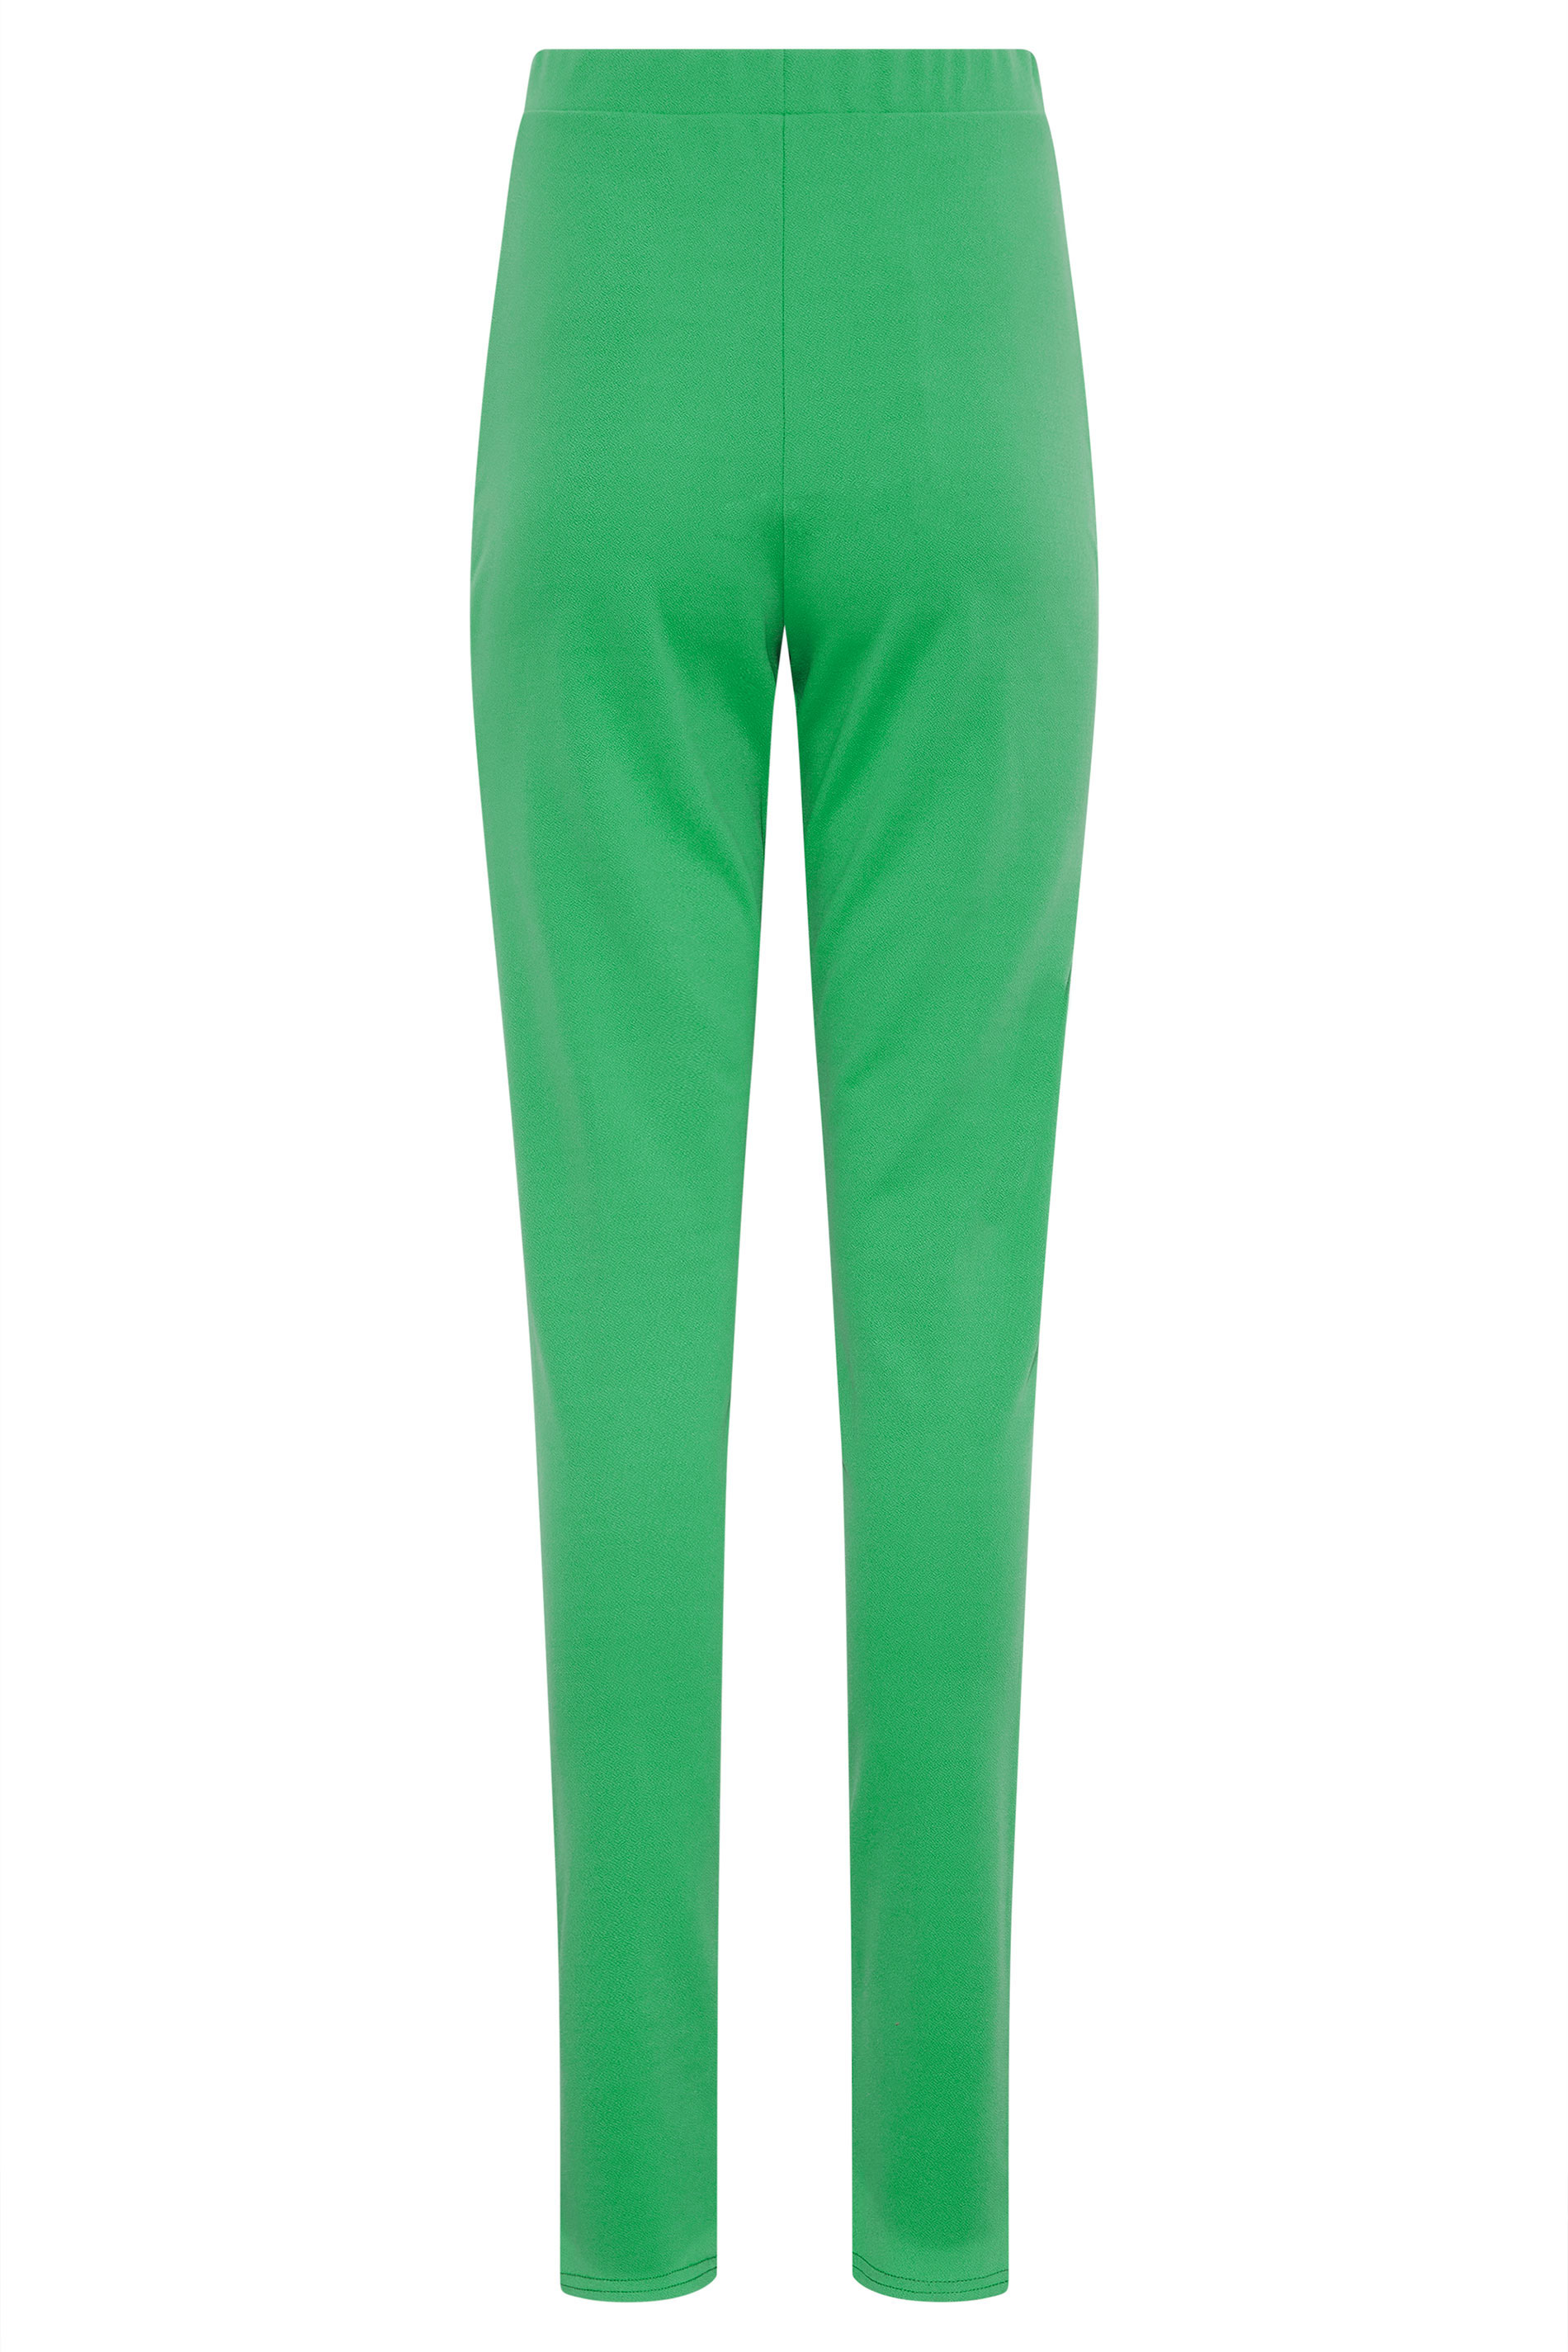 Topshop Tailored co ord straight leg trouser in bright green  ASOS